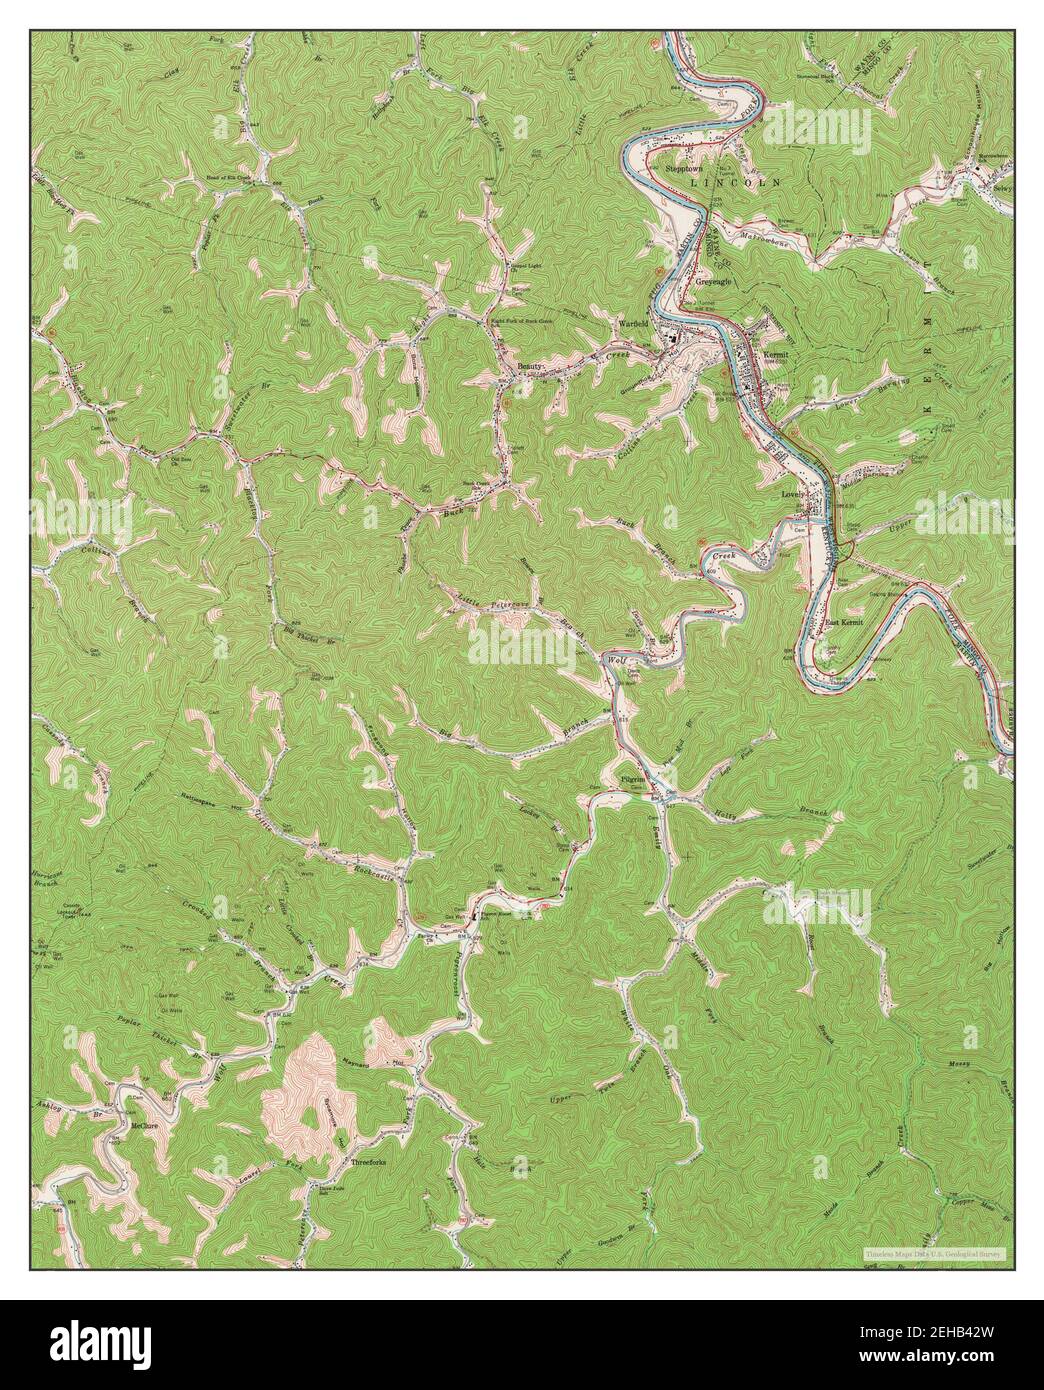 Kermit, Kentucky, map 1963, 1:24000, United States of America by Timeless Maps, data U.S. Geological Survey Stock Photo